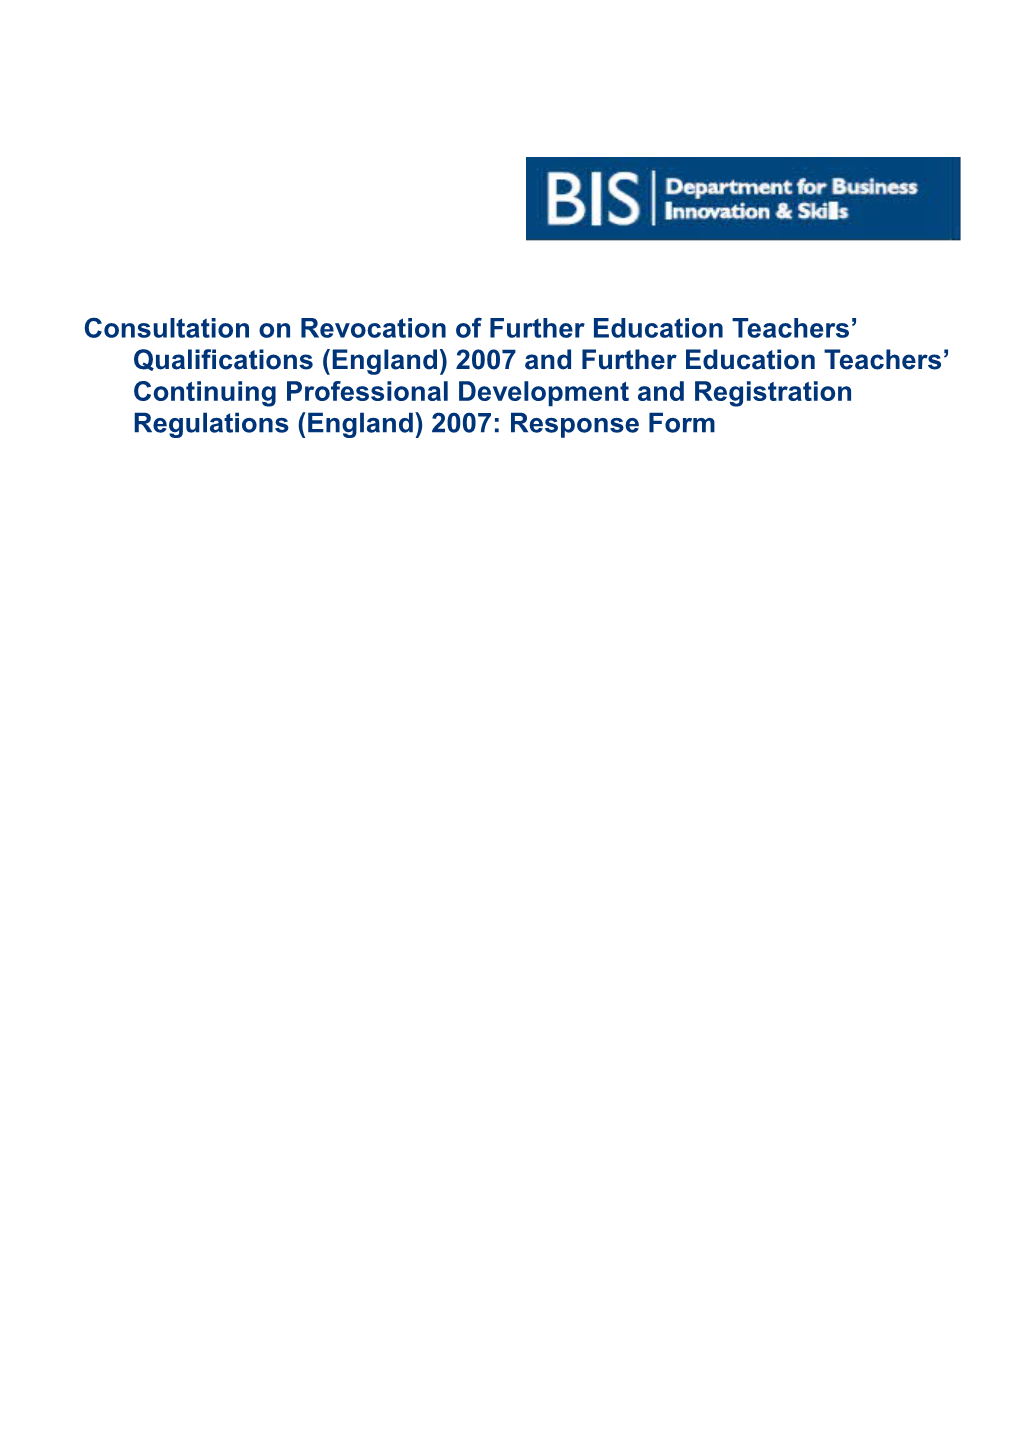 Consultation on Revocation of Further Education Teachers Qualifications (England) 2007